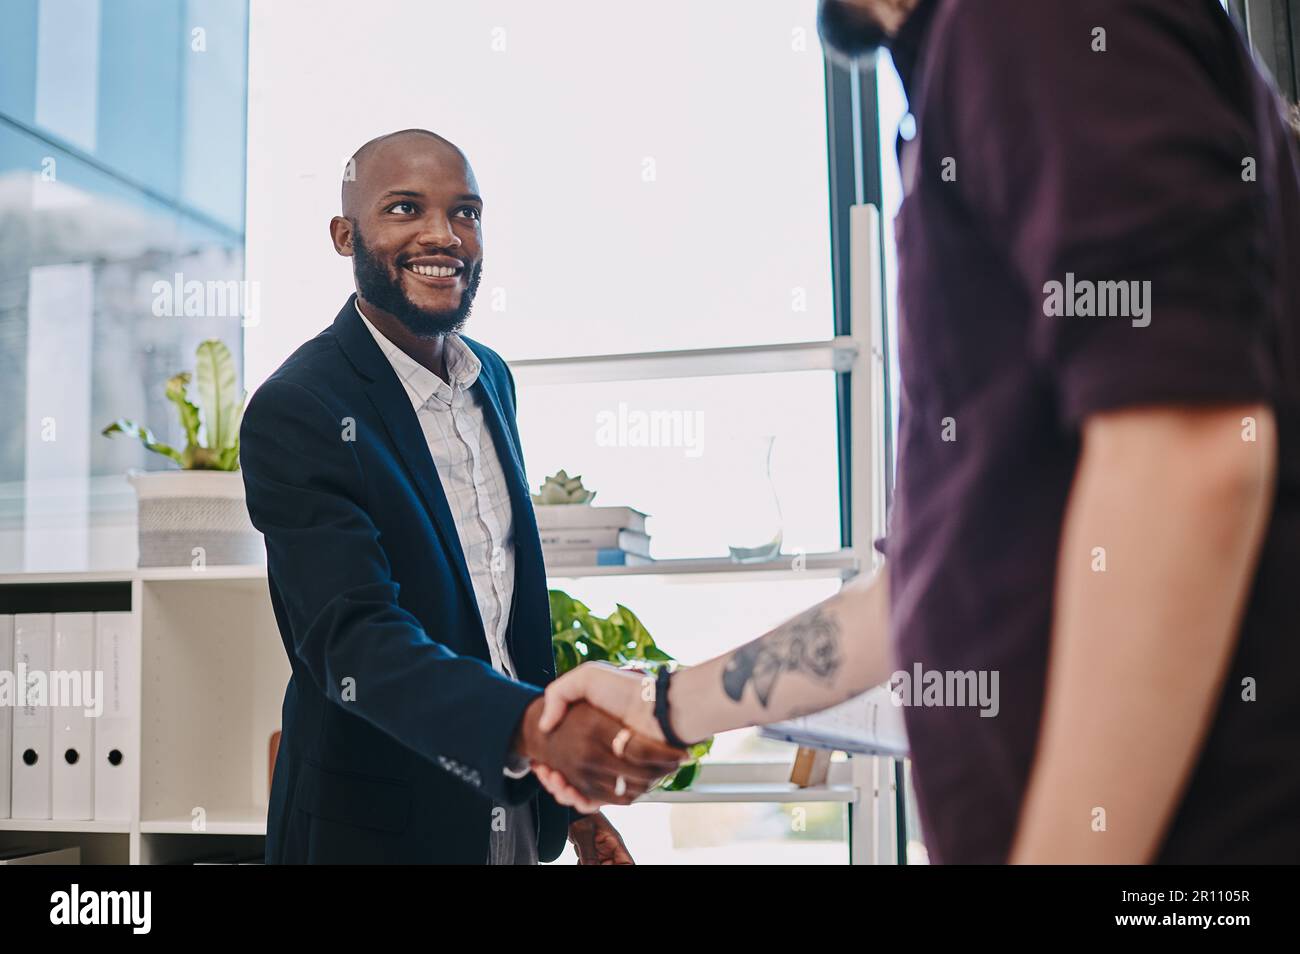 His hard work has not gone unnoticed. two businesspeople shaking hands at the office. Stock Photo